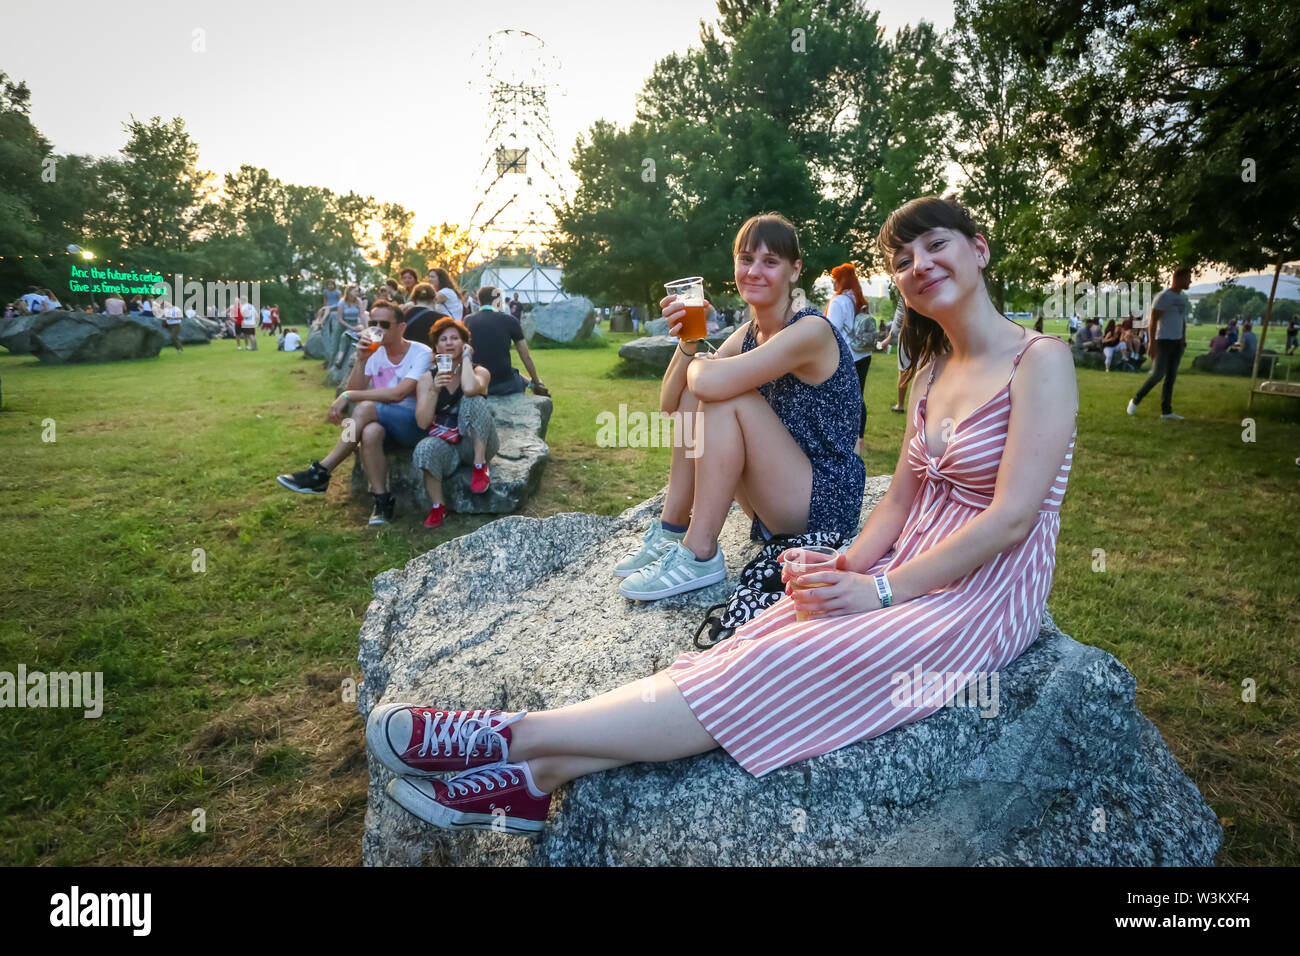 Zagreb Croatia 25th June 2019 Atmosphere During 2nd Day Of The 14th Inmusic Festival Located On The Lake Jarun In Zagreb Croatia People Restin Stock Photo Alamy